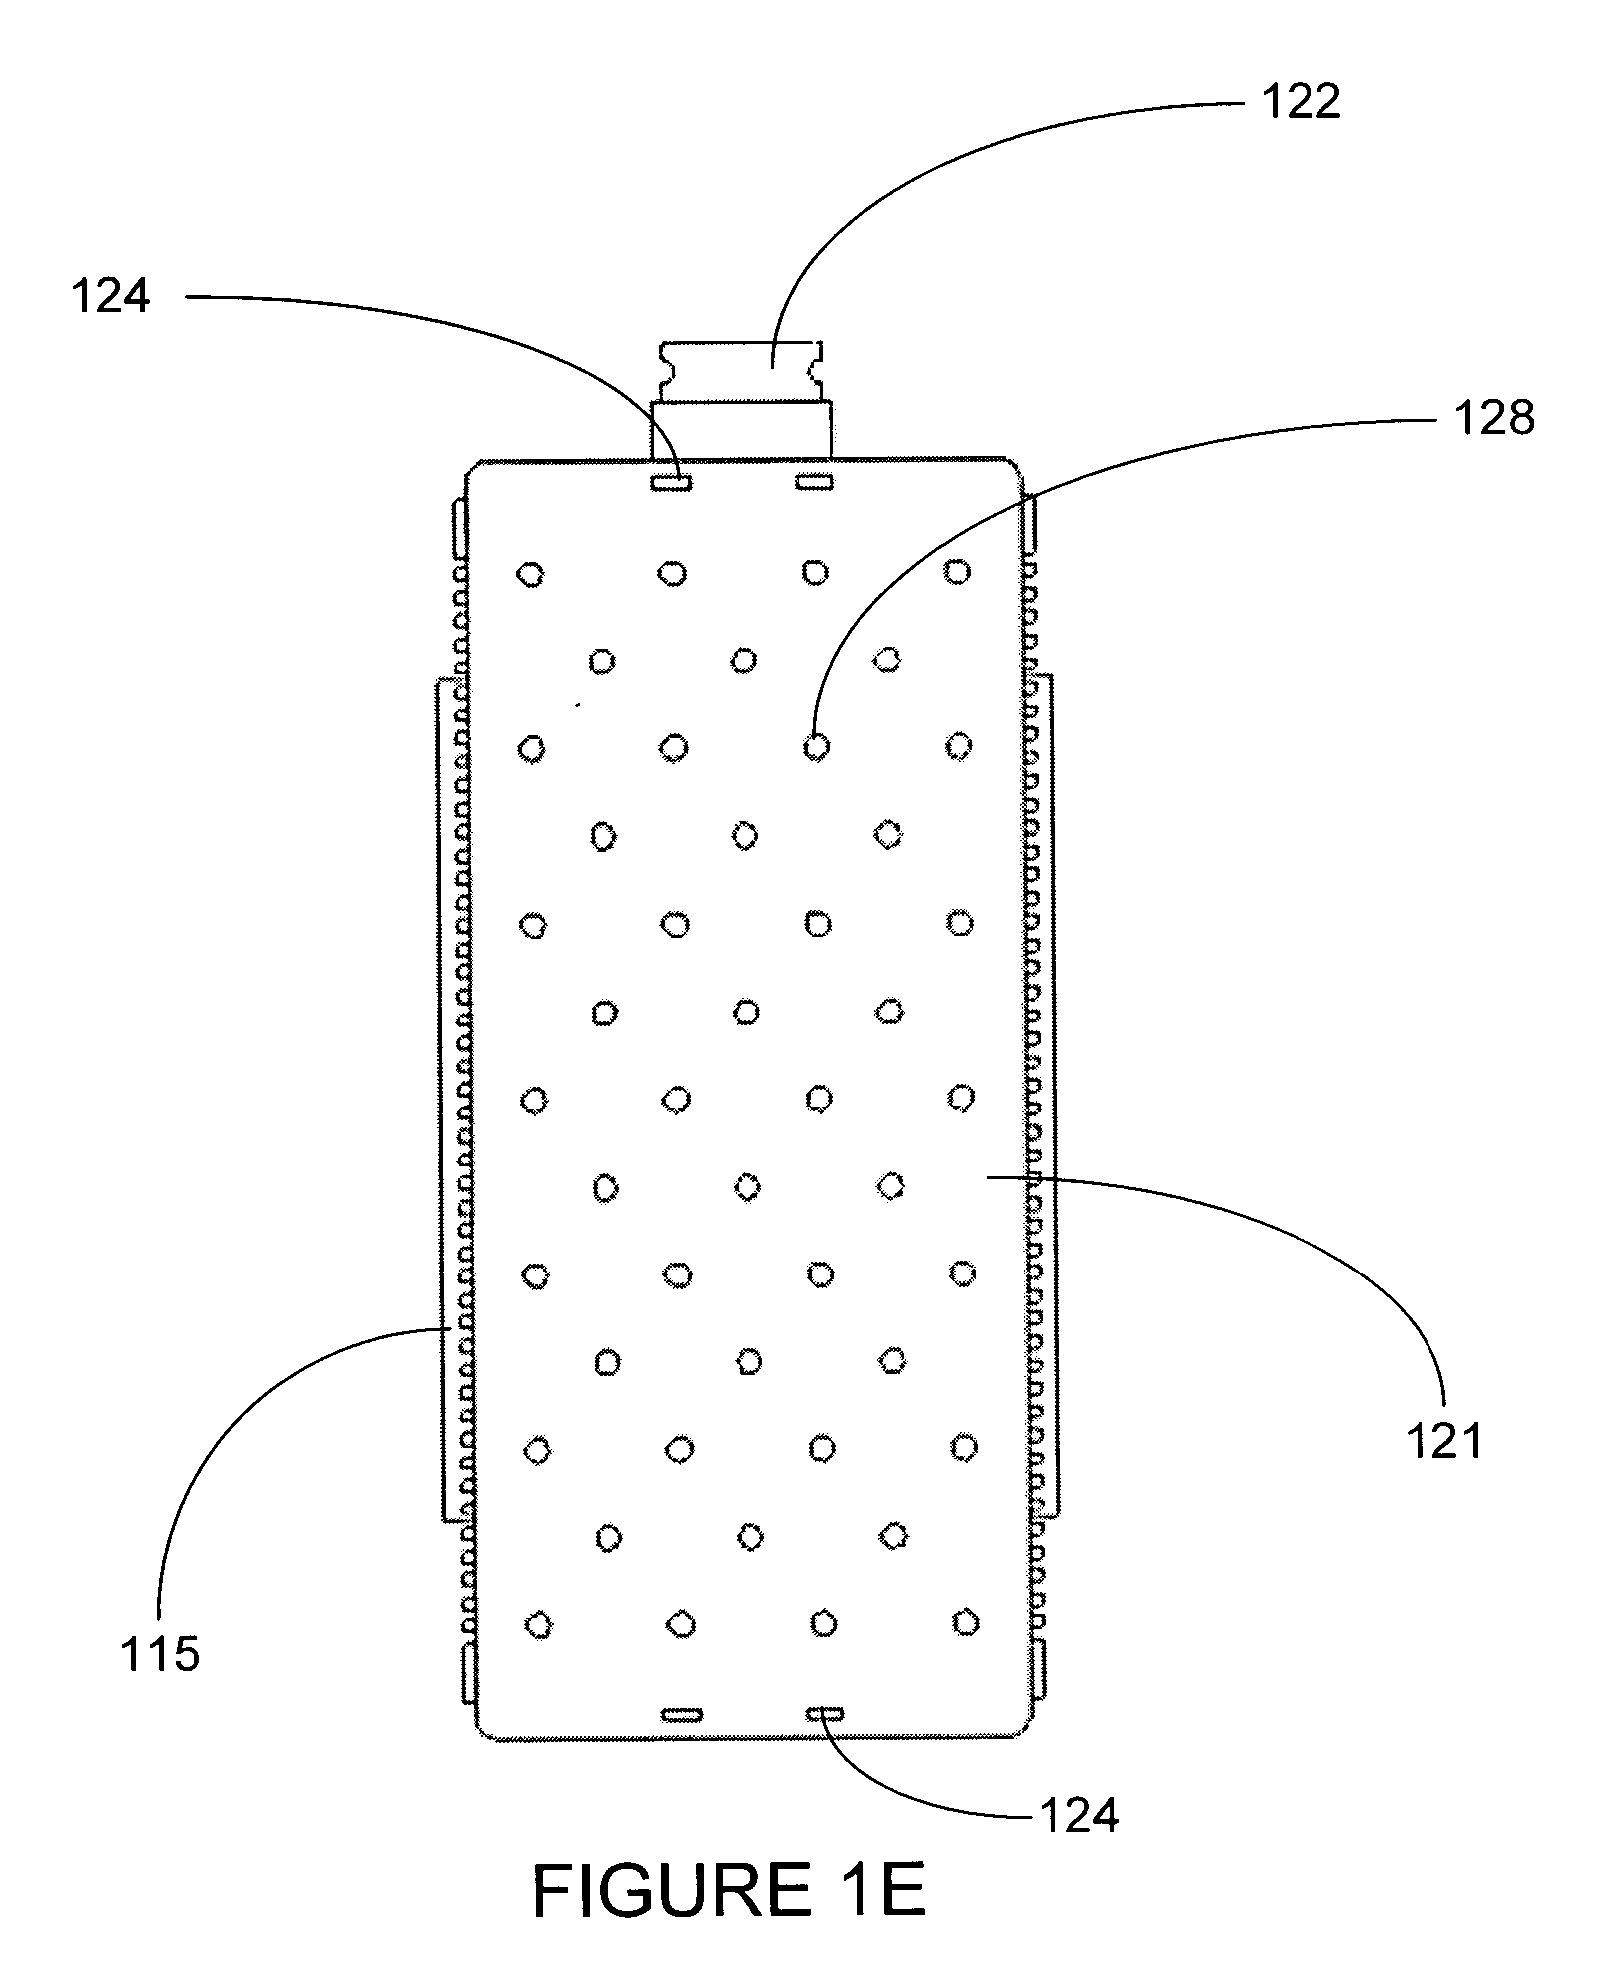 Battery case having improved thermal conductivity